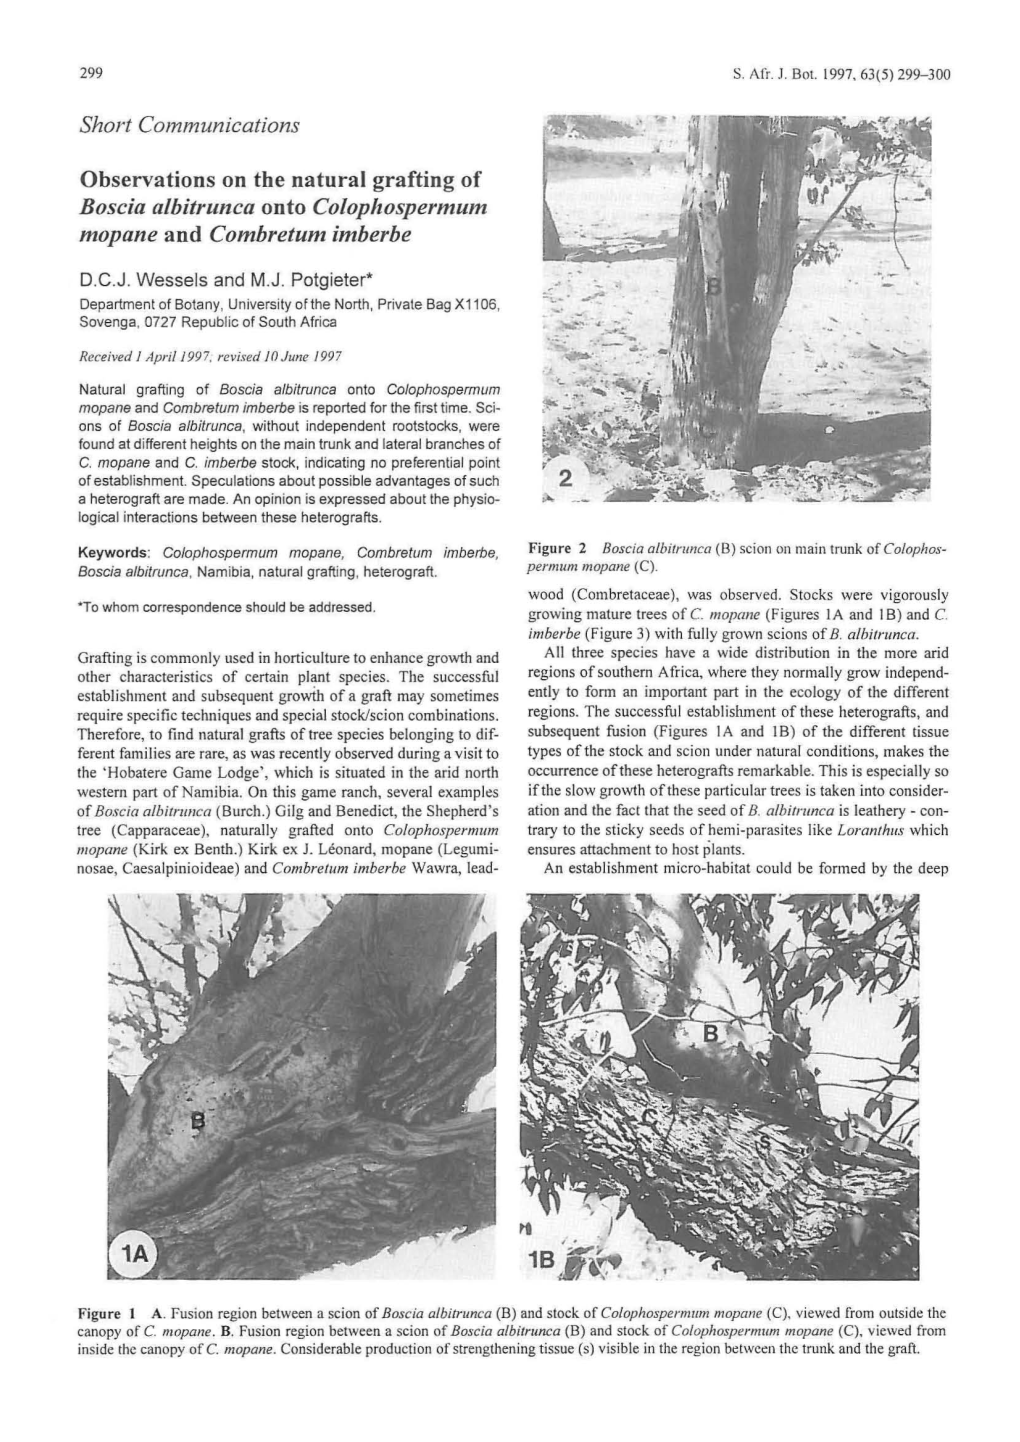 Observations on the Natural Grafting of Boscia Albitrunca Onto Colophospermum Mopane and Combretum Imberbe